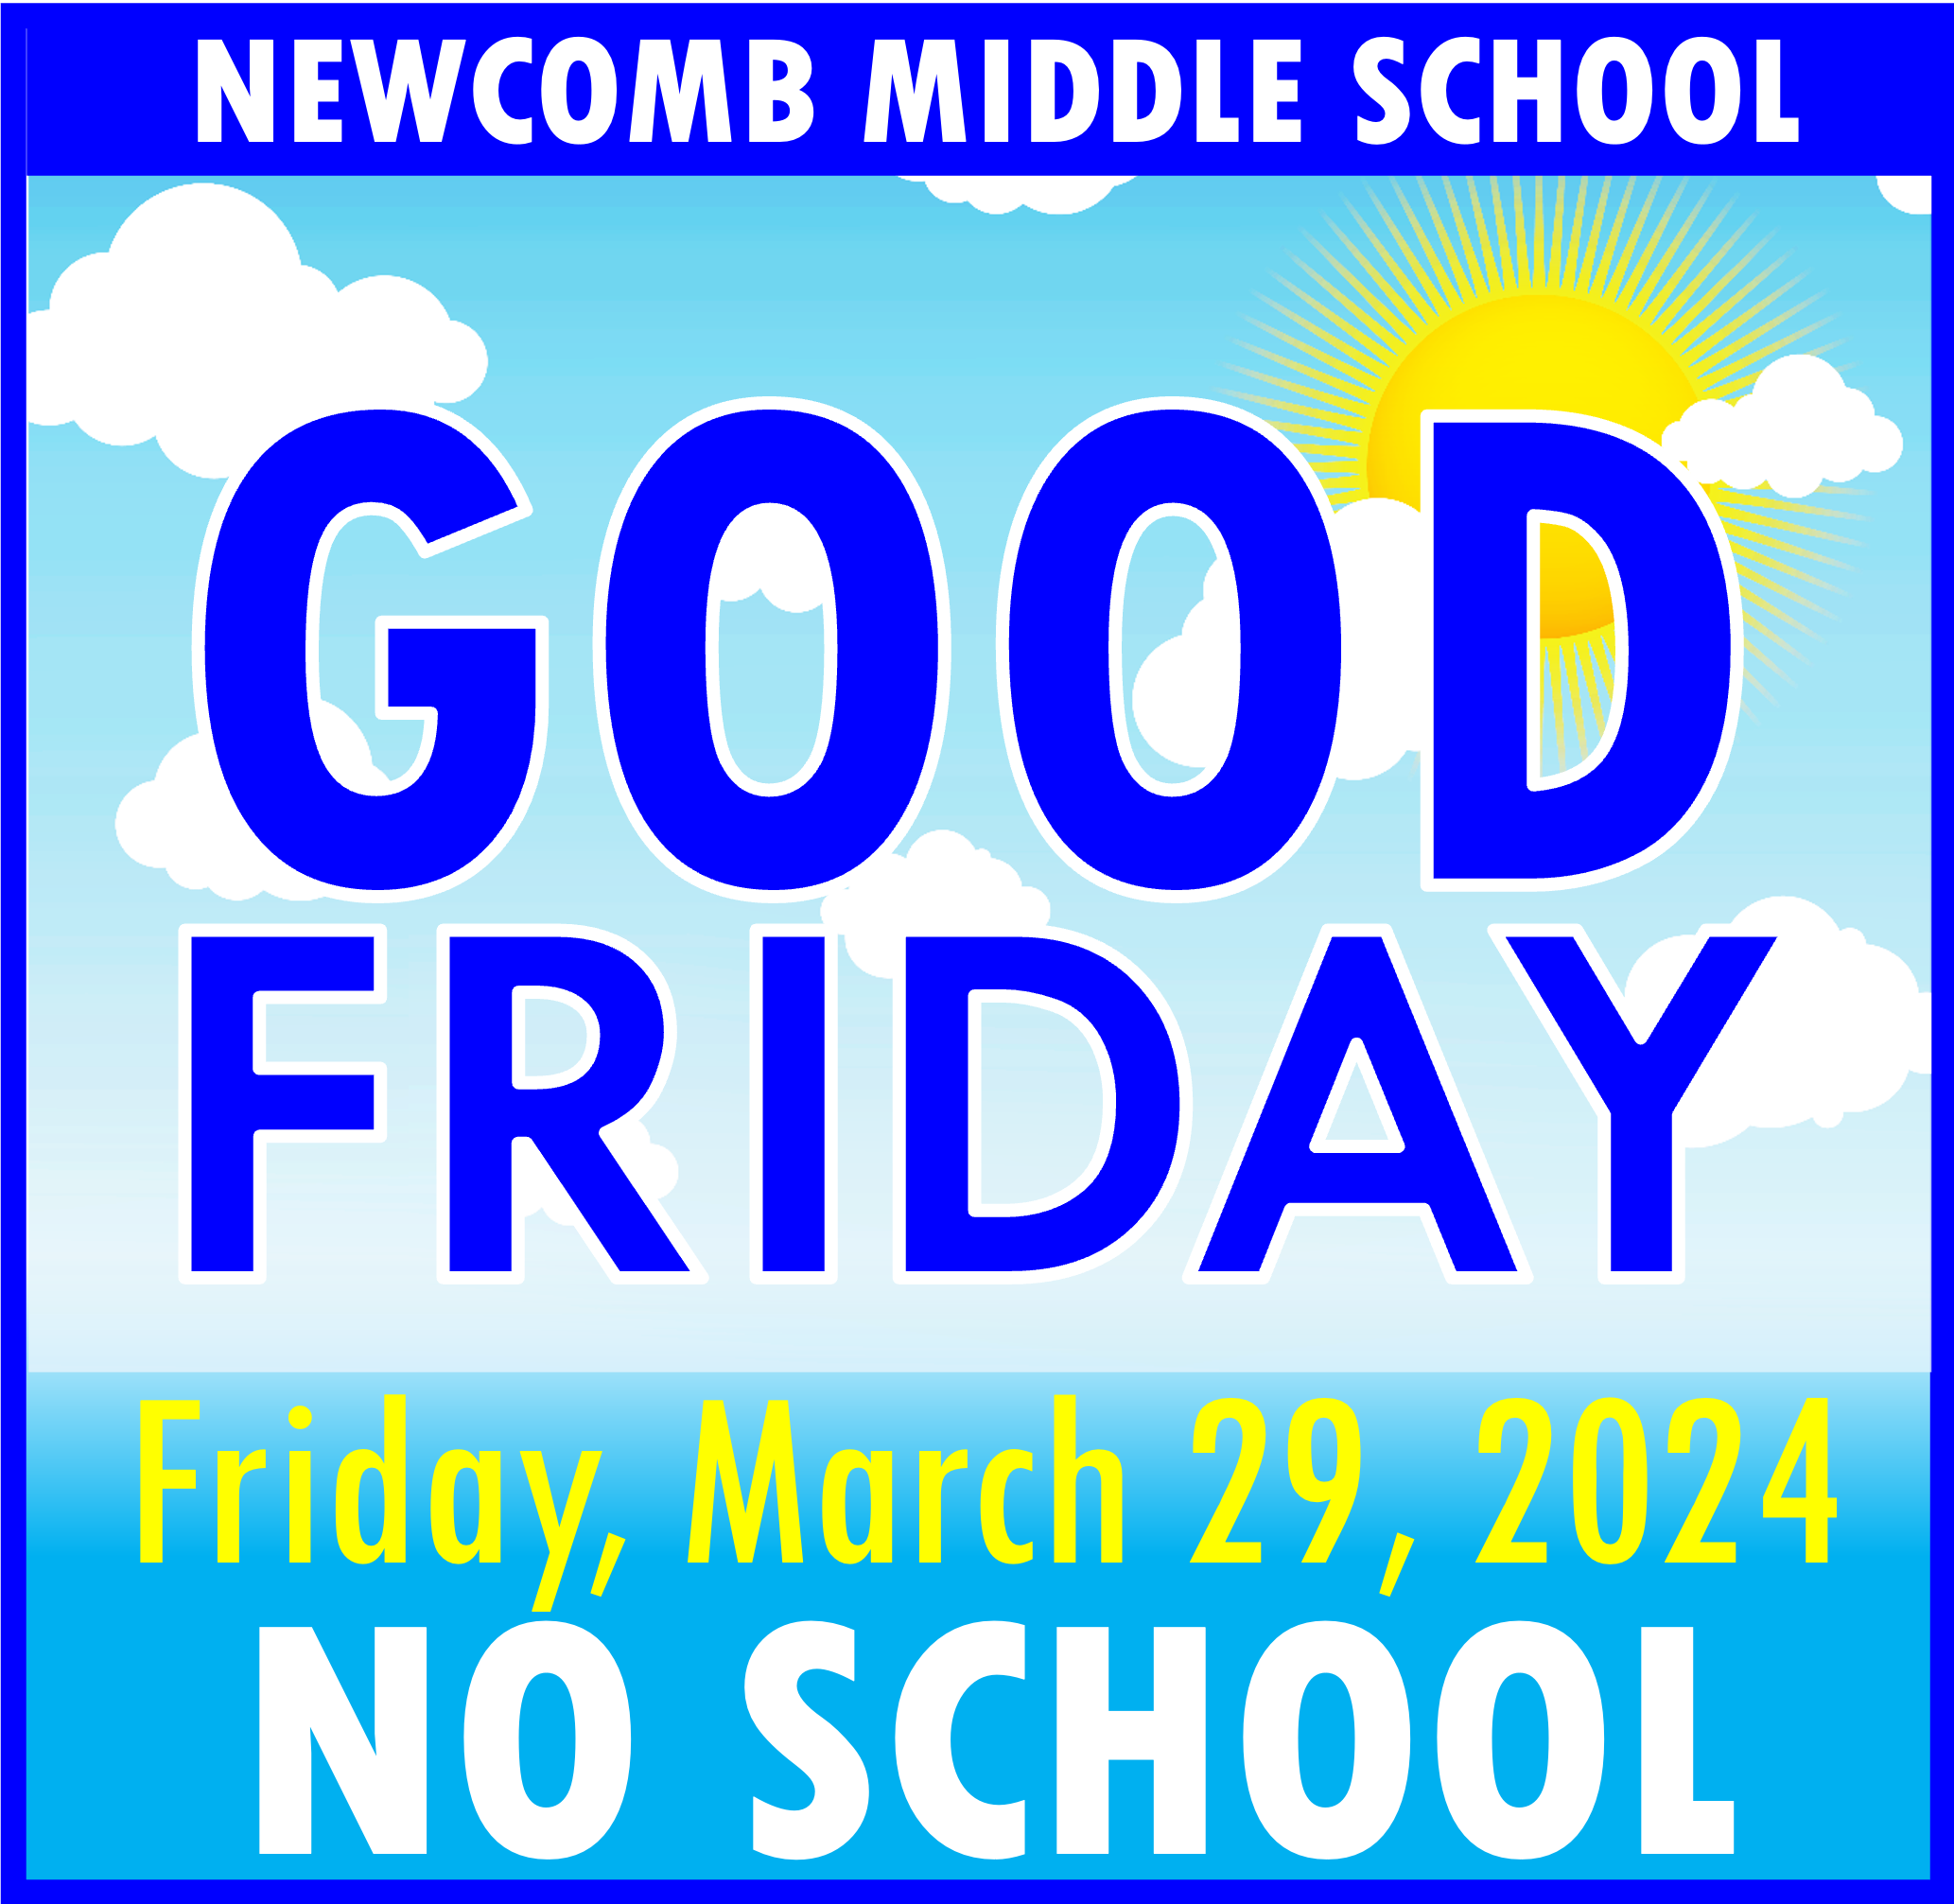 NMS, Good Friday, Friday, March 29, 2024, NO SCHOOL 